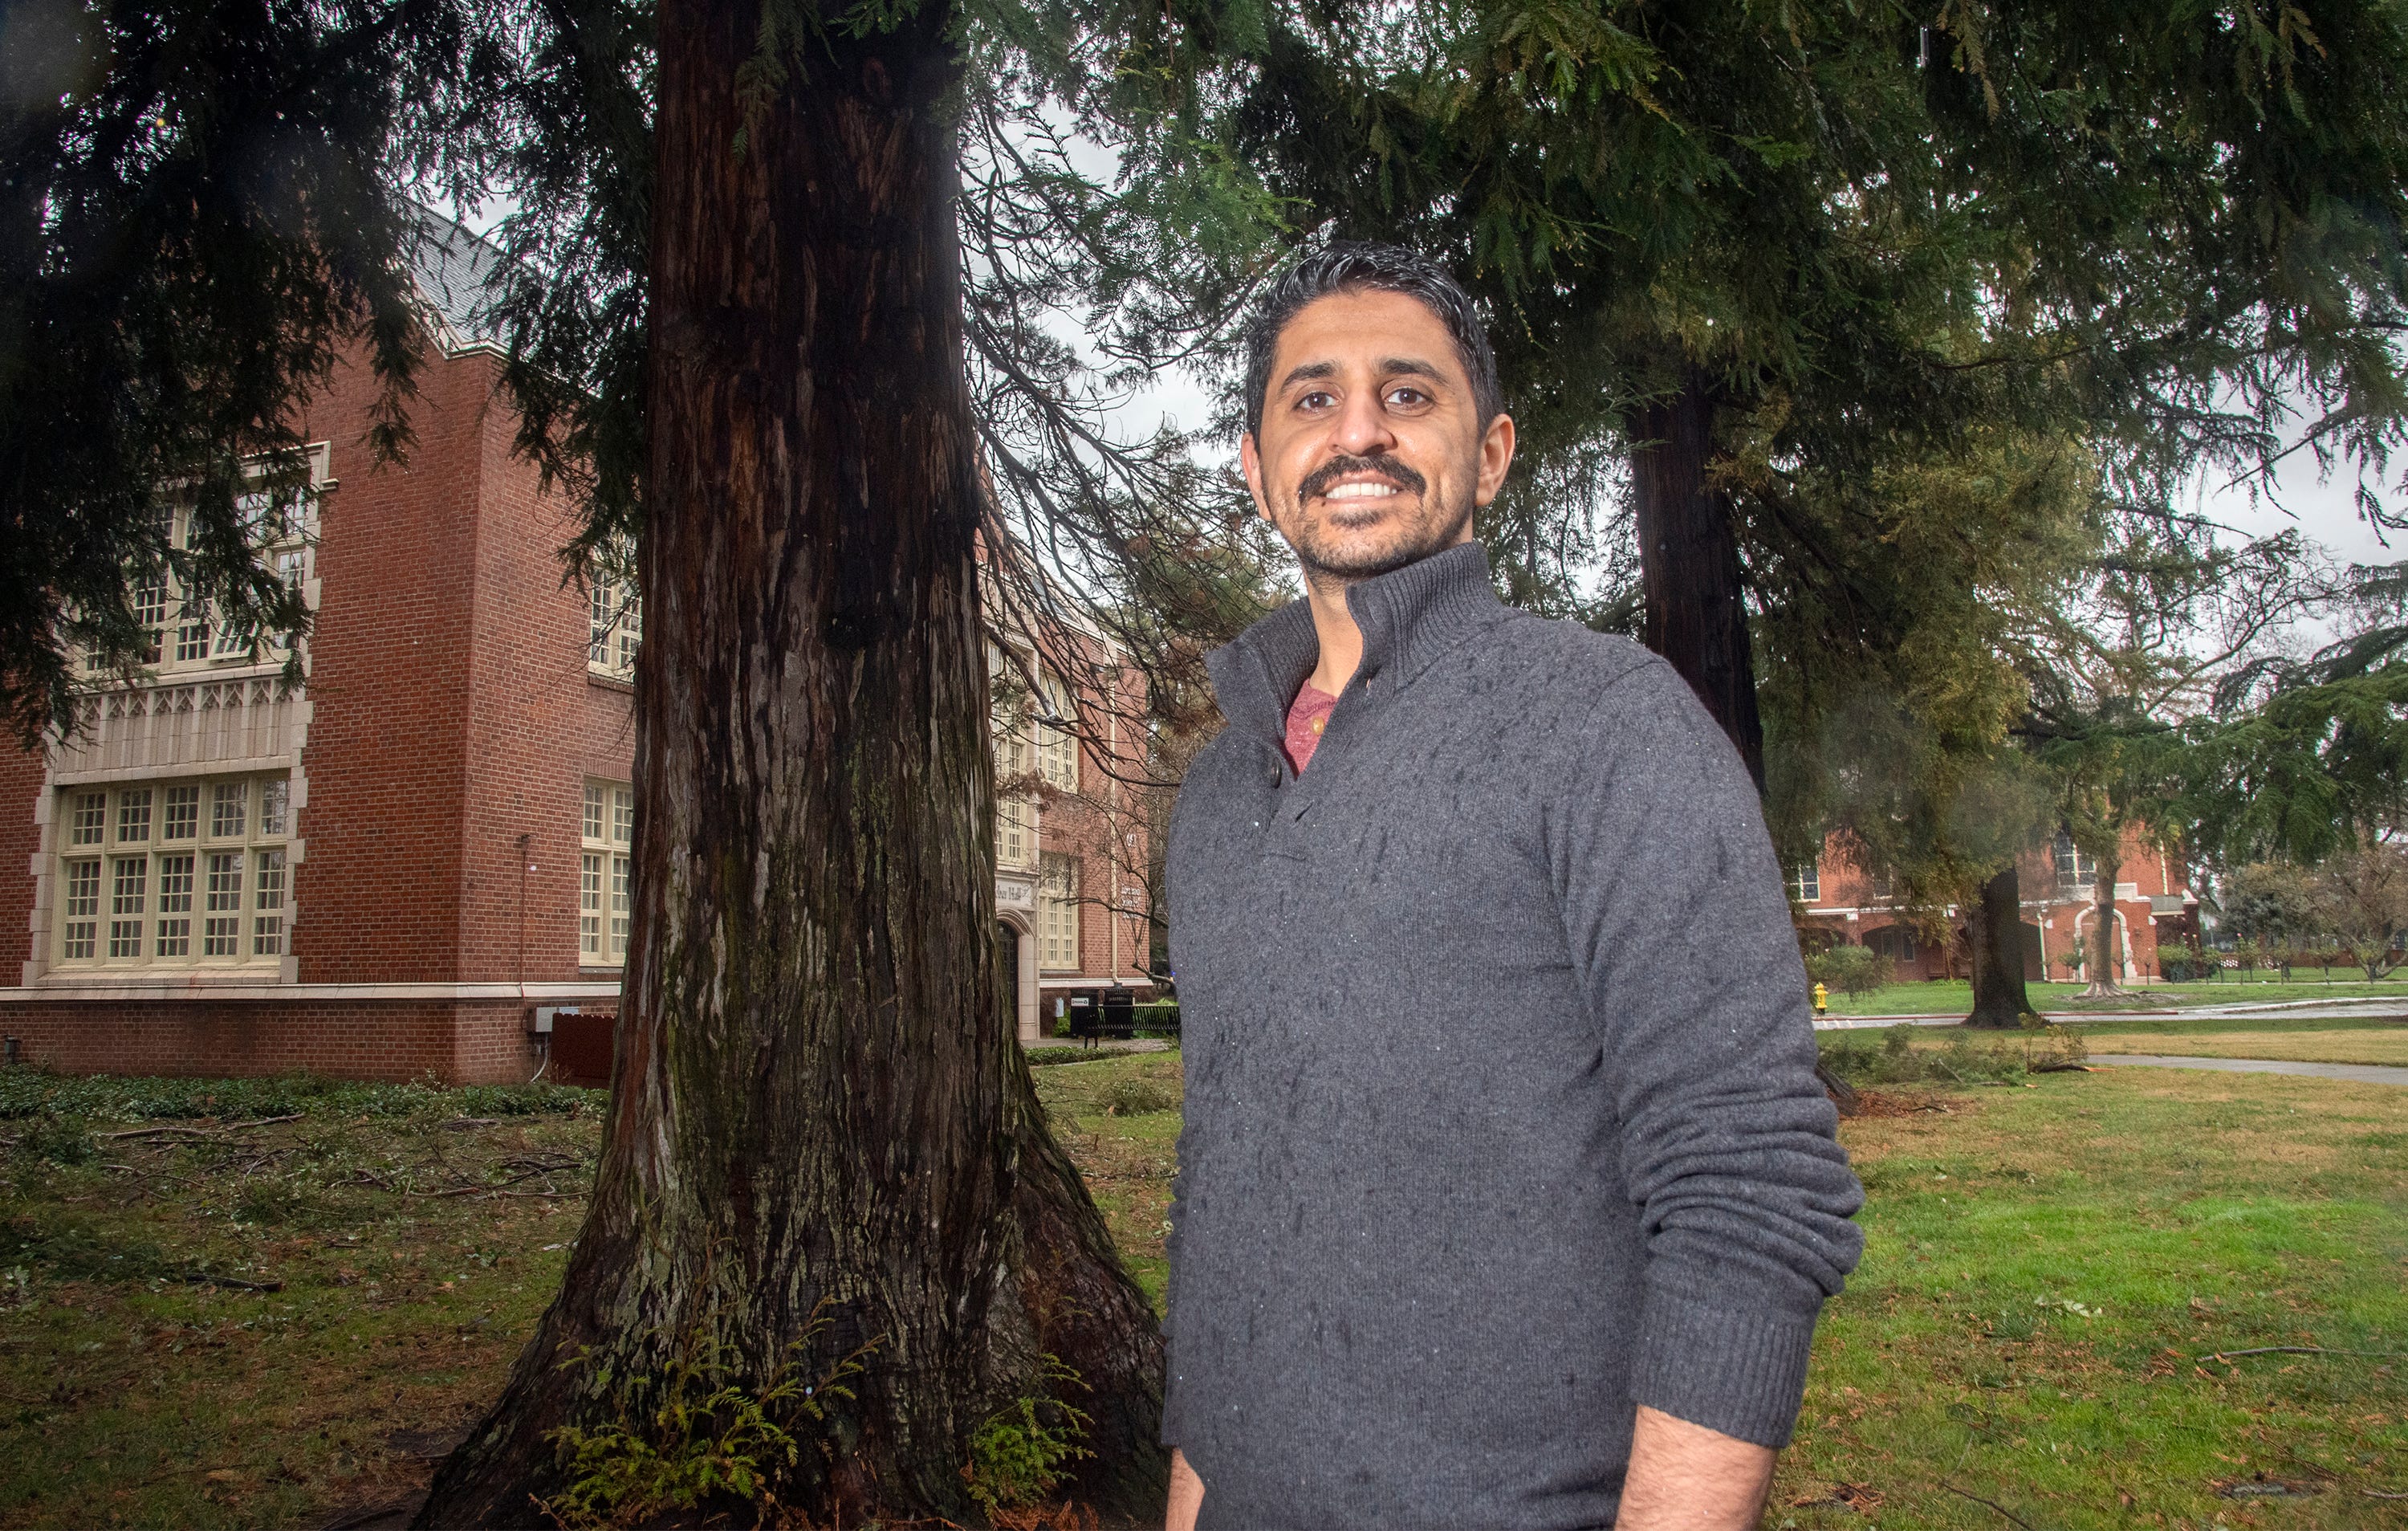 Harpreet Chima, who is spearheading the CALL Stockton campaign, was inspired to bring a crisis response system like the one in Eugene, Oregon, after seeing it working.